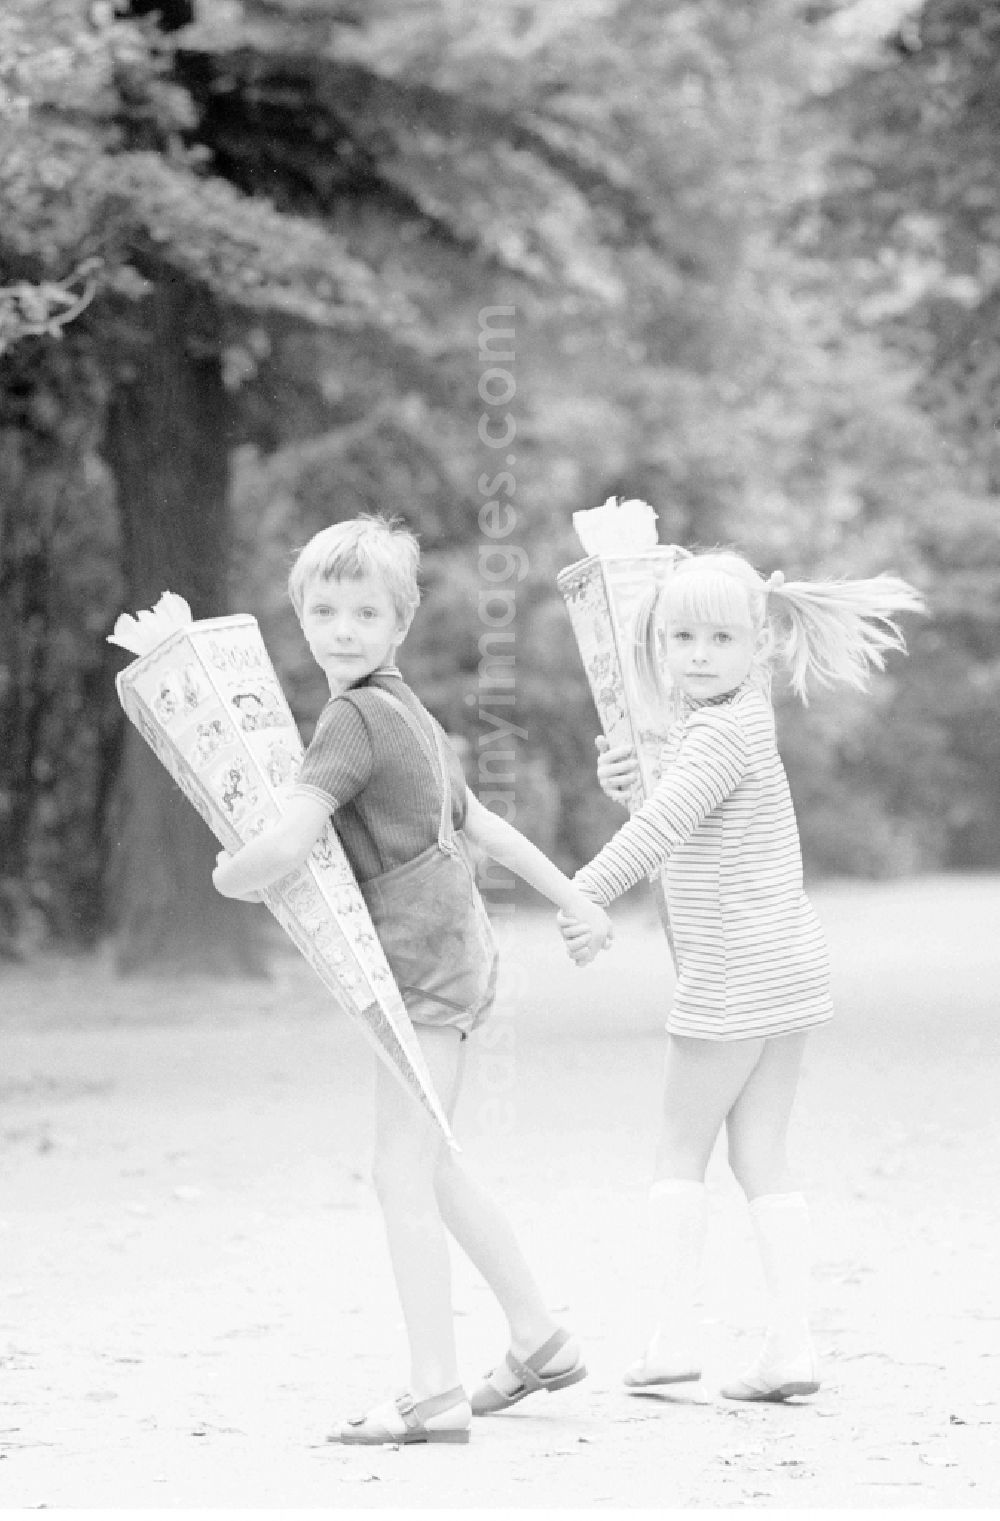 Berlin: Two first graders with their bags of sugar in Berlin, the former capital of the GDR, German Democratic Republic